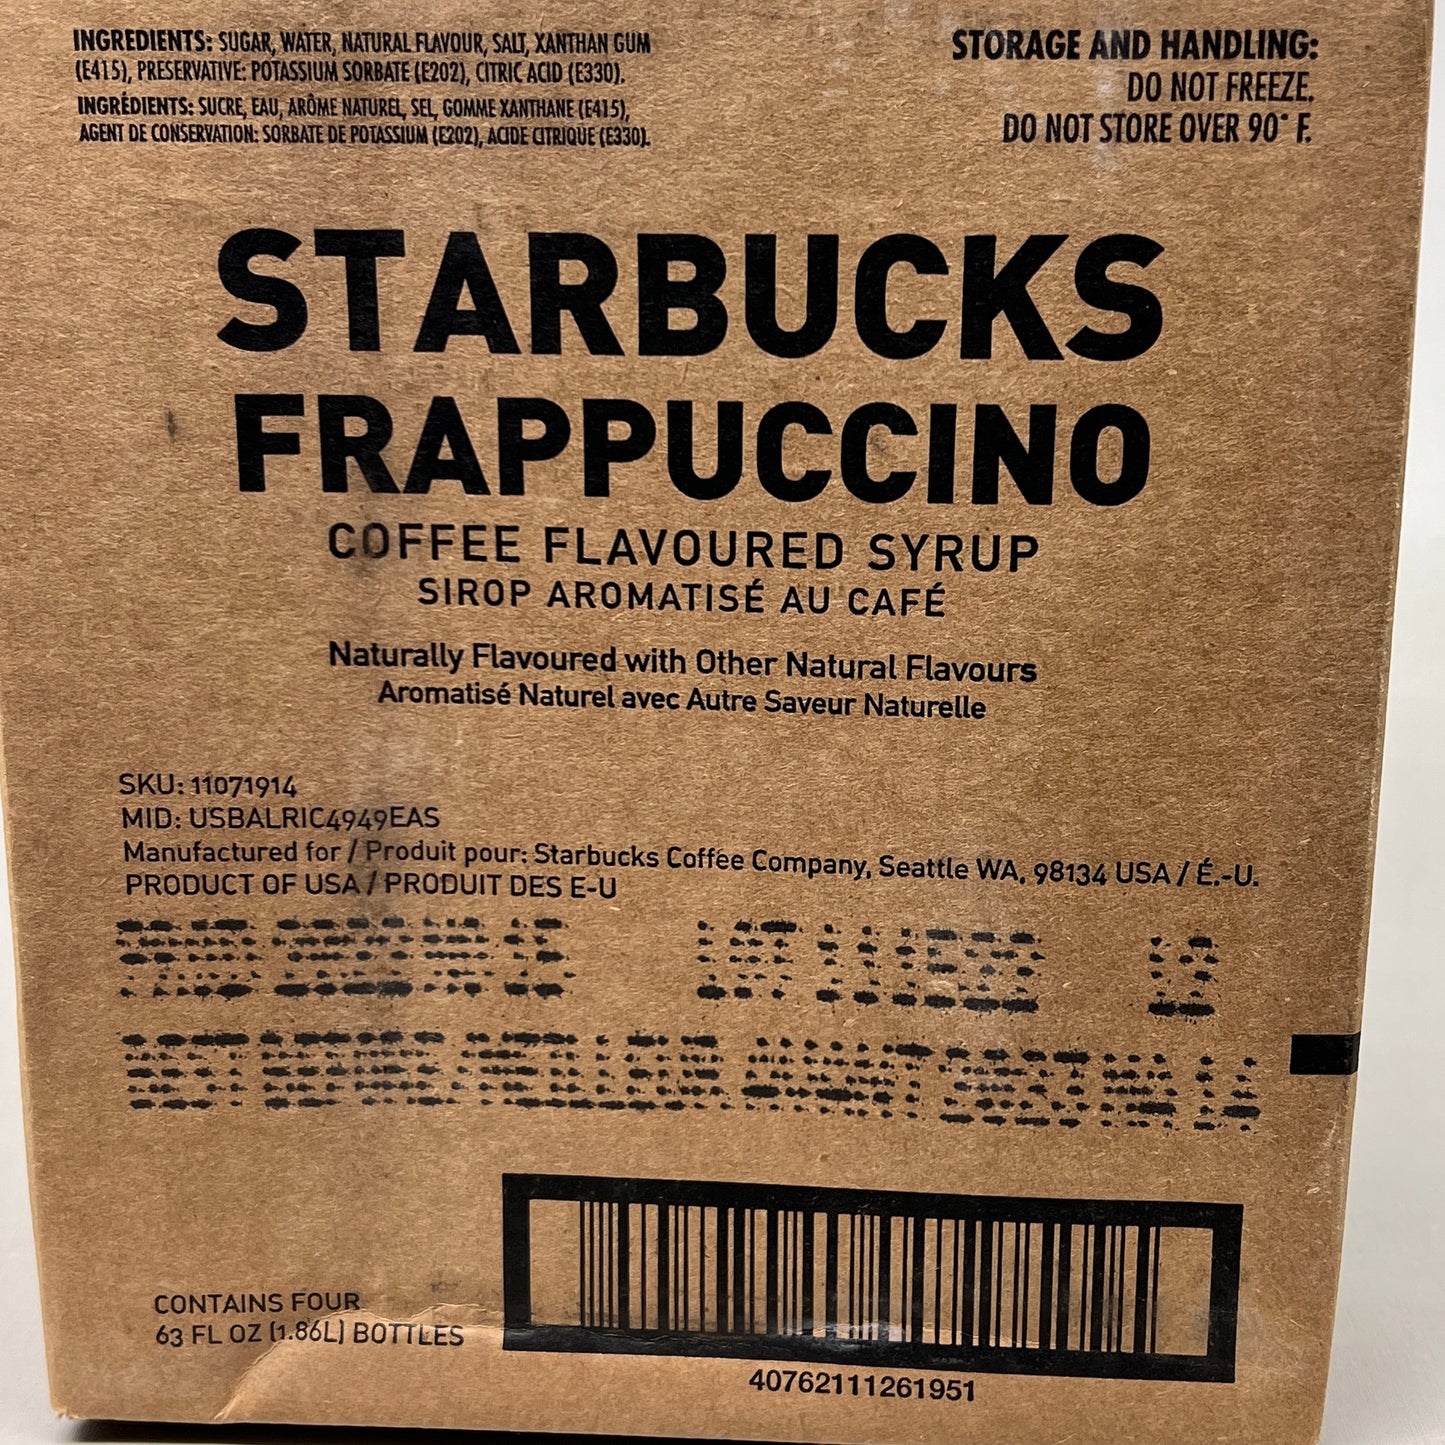 ZA@ STARBUCKS 4-PACK! Frappuccino Syrup Coffee Flavored Syrup (1.86 L/bottle) 5/23 (Expired)